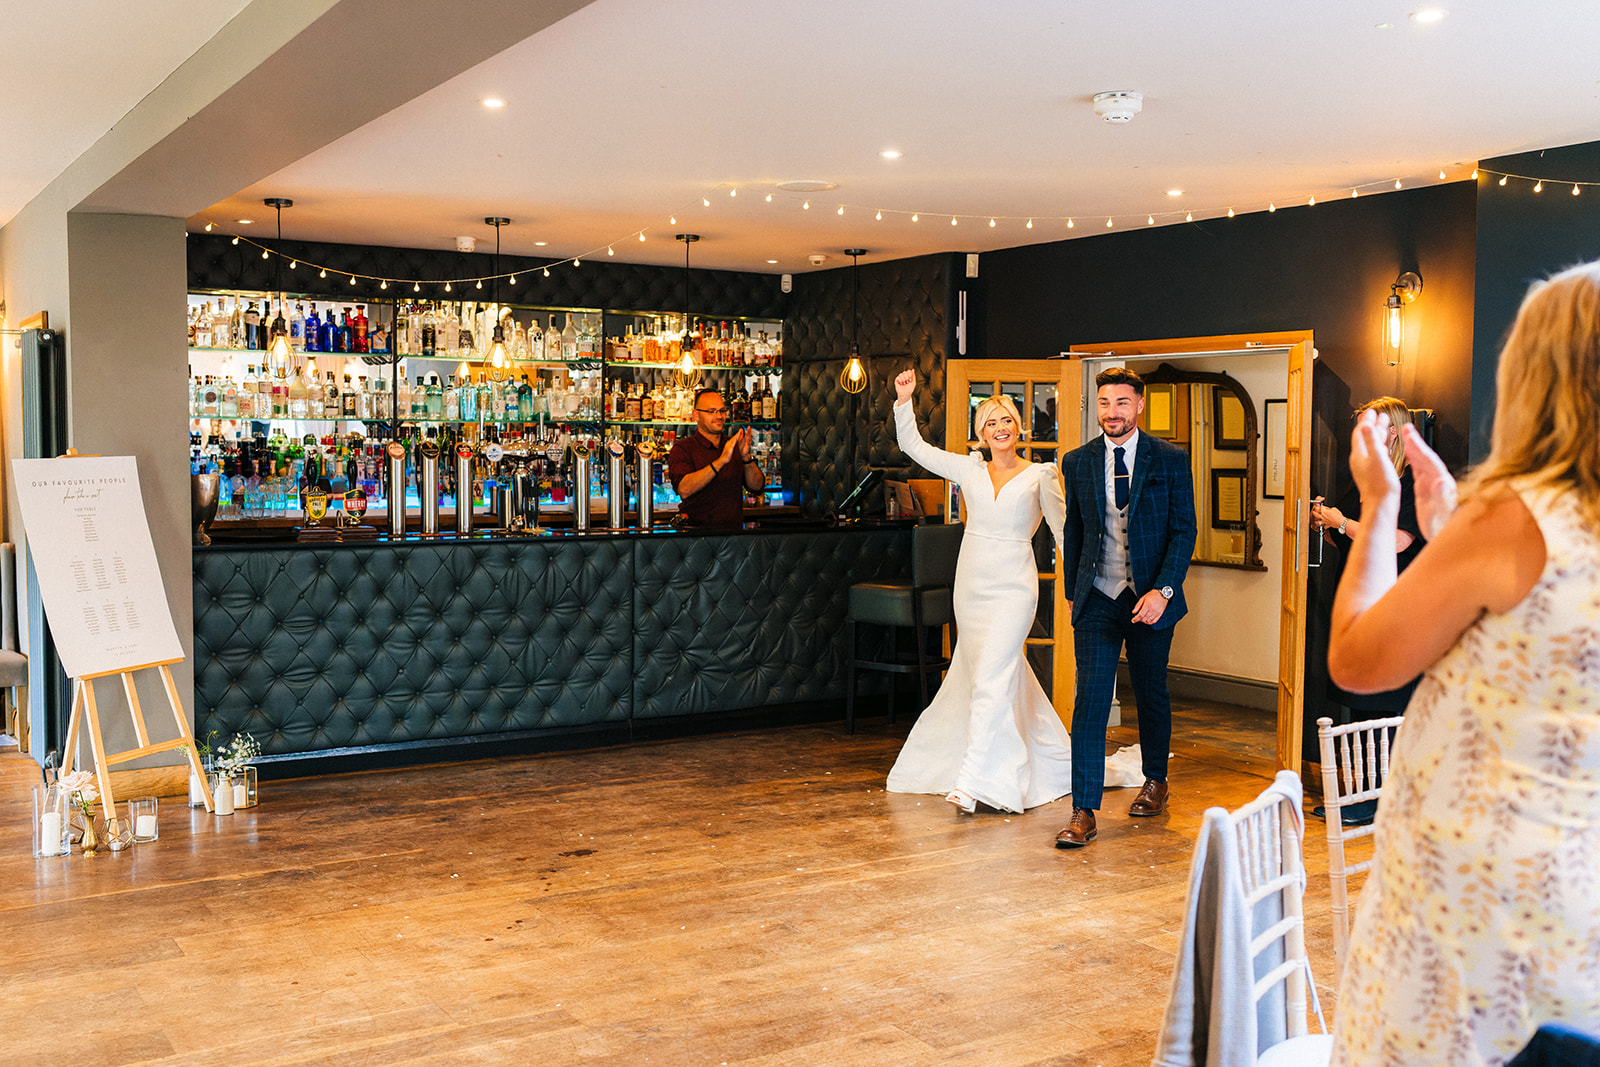 The Chequers Inn Wedding Photography - the bride and groom get announced into the wedding breakfast room